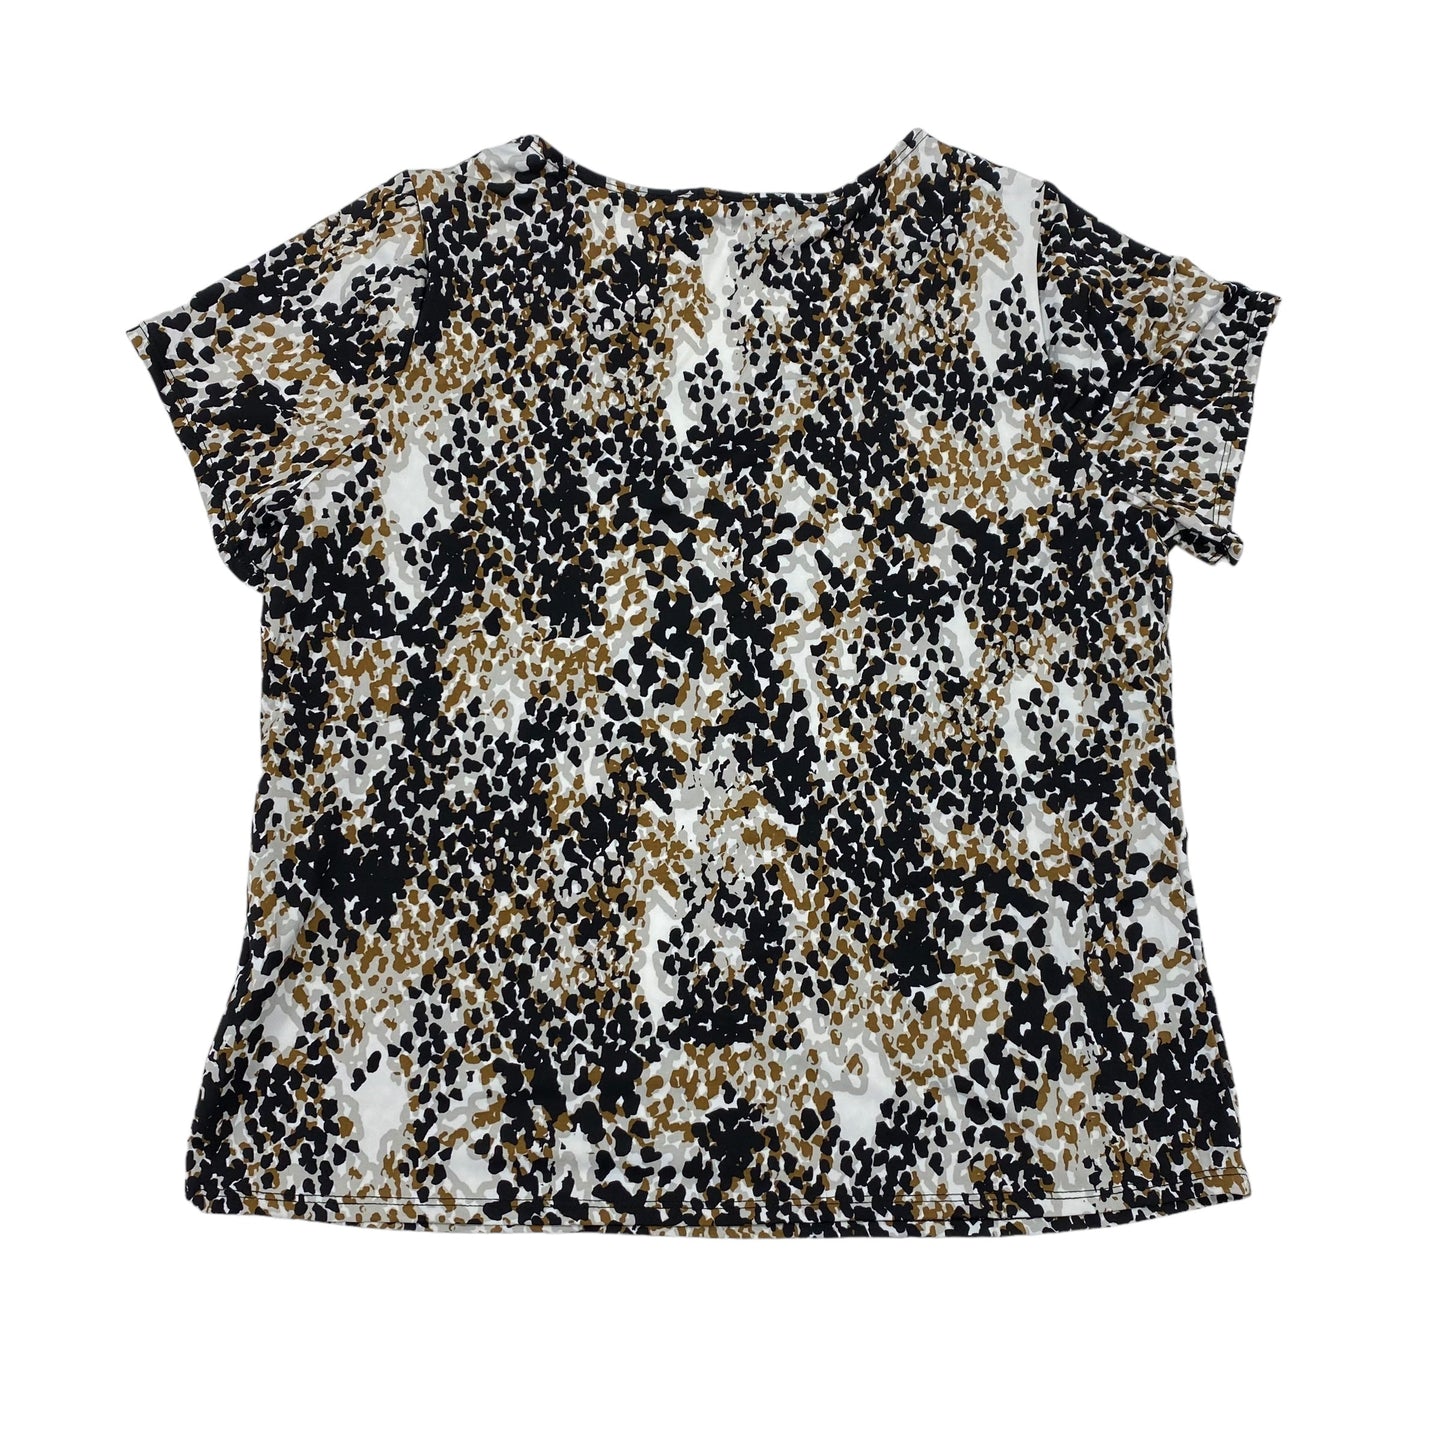 BLACK & TAN TOP SS by NOTATIONS Size:1X